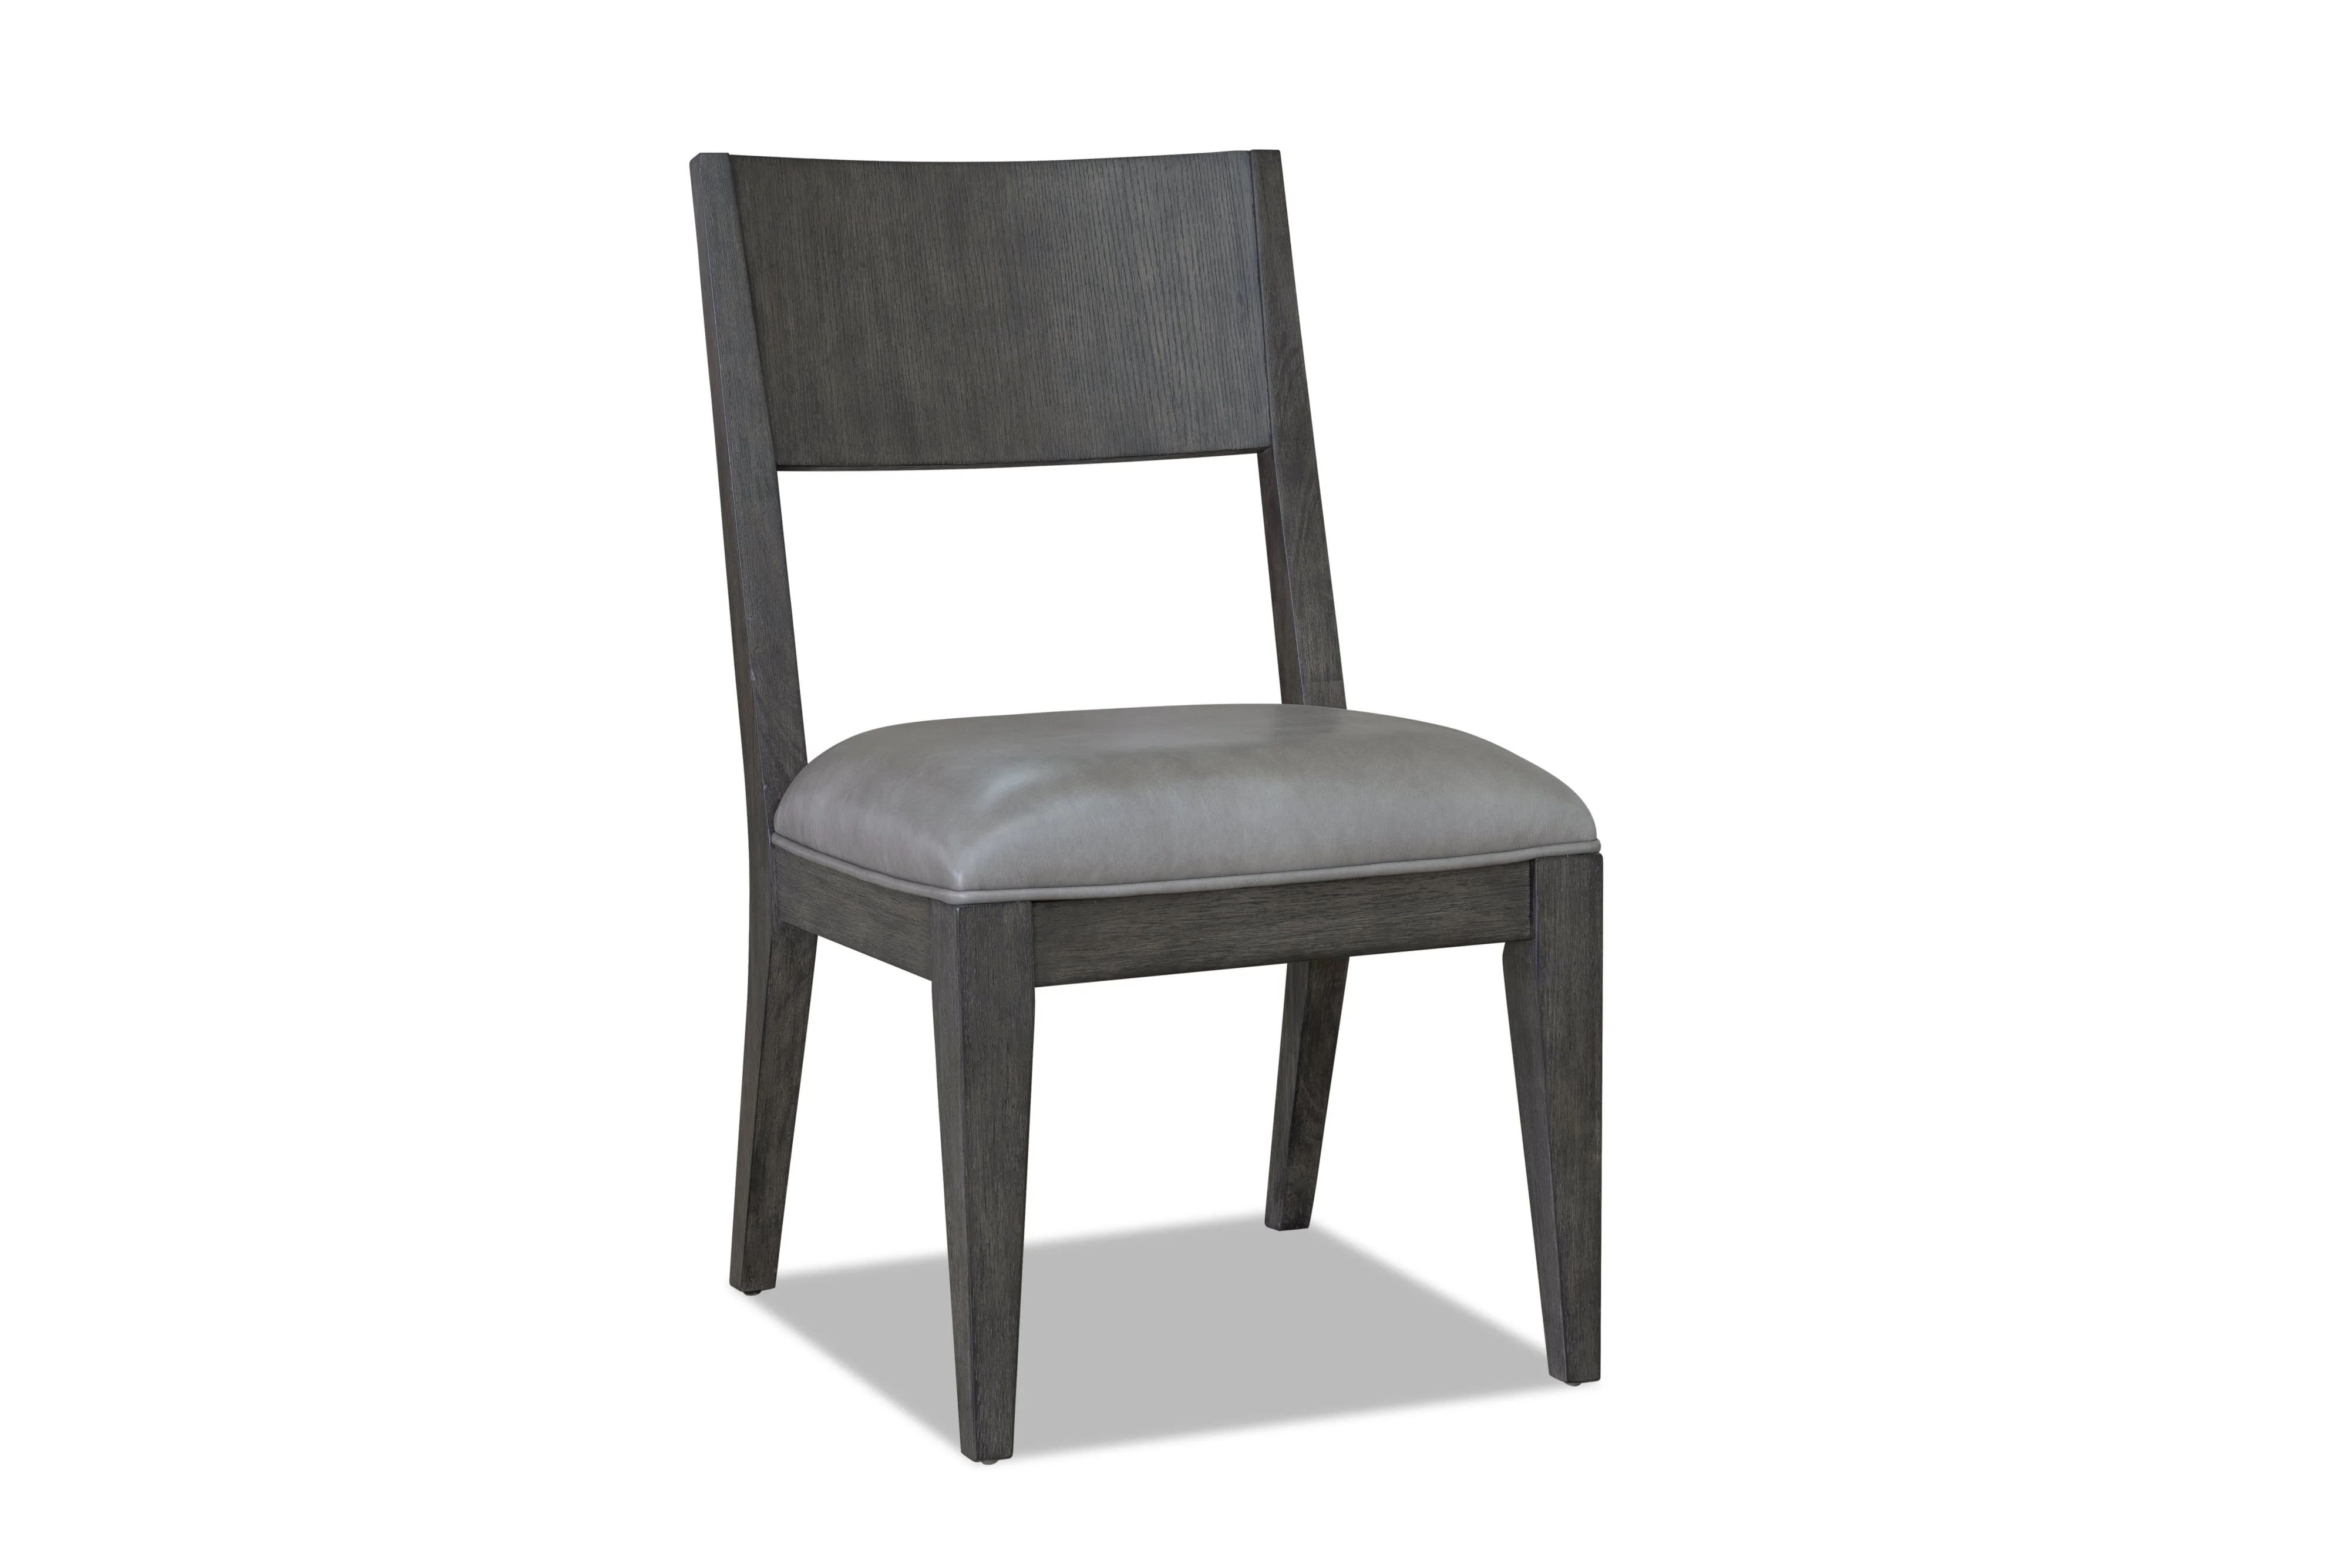 Can A Dining Room Side Chair Have Arms